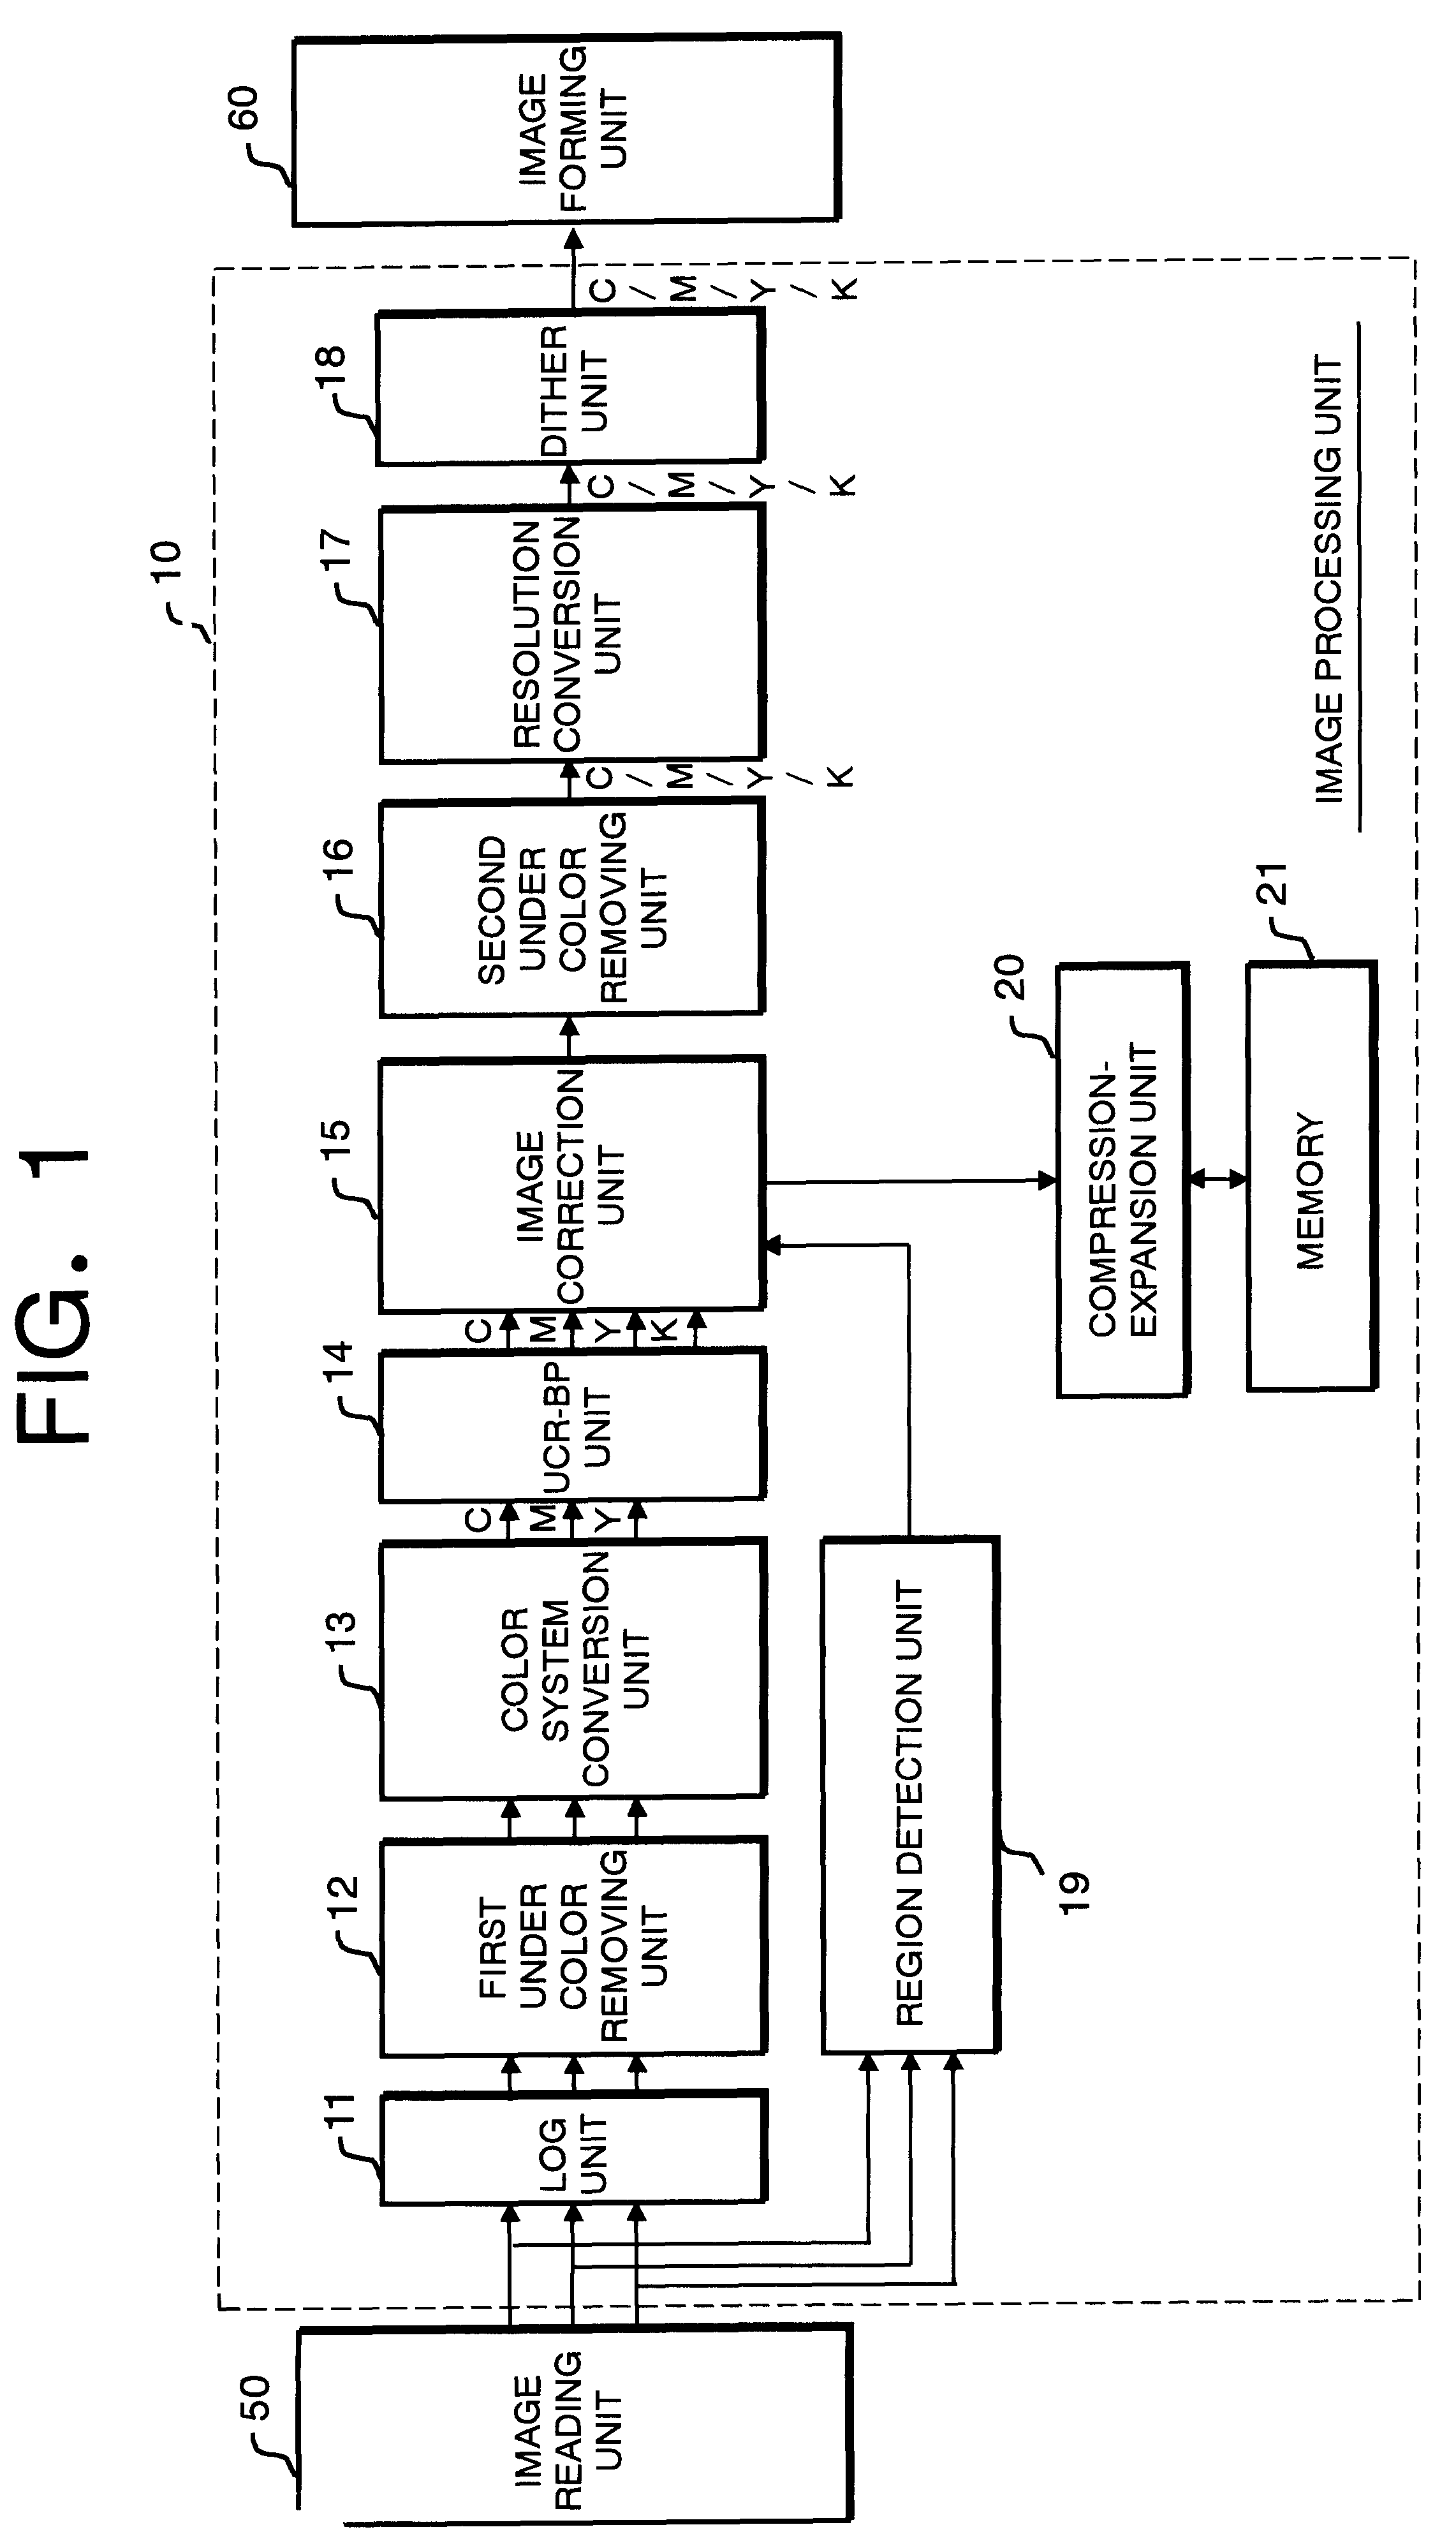 Apparatus, method, and computer program product for noise reduction image processing